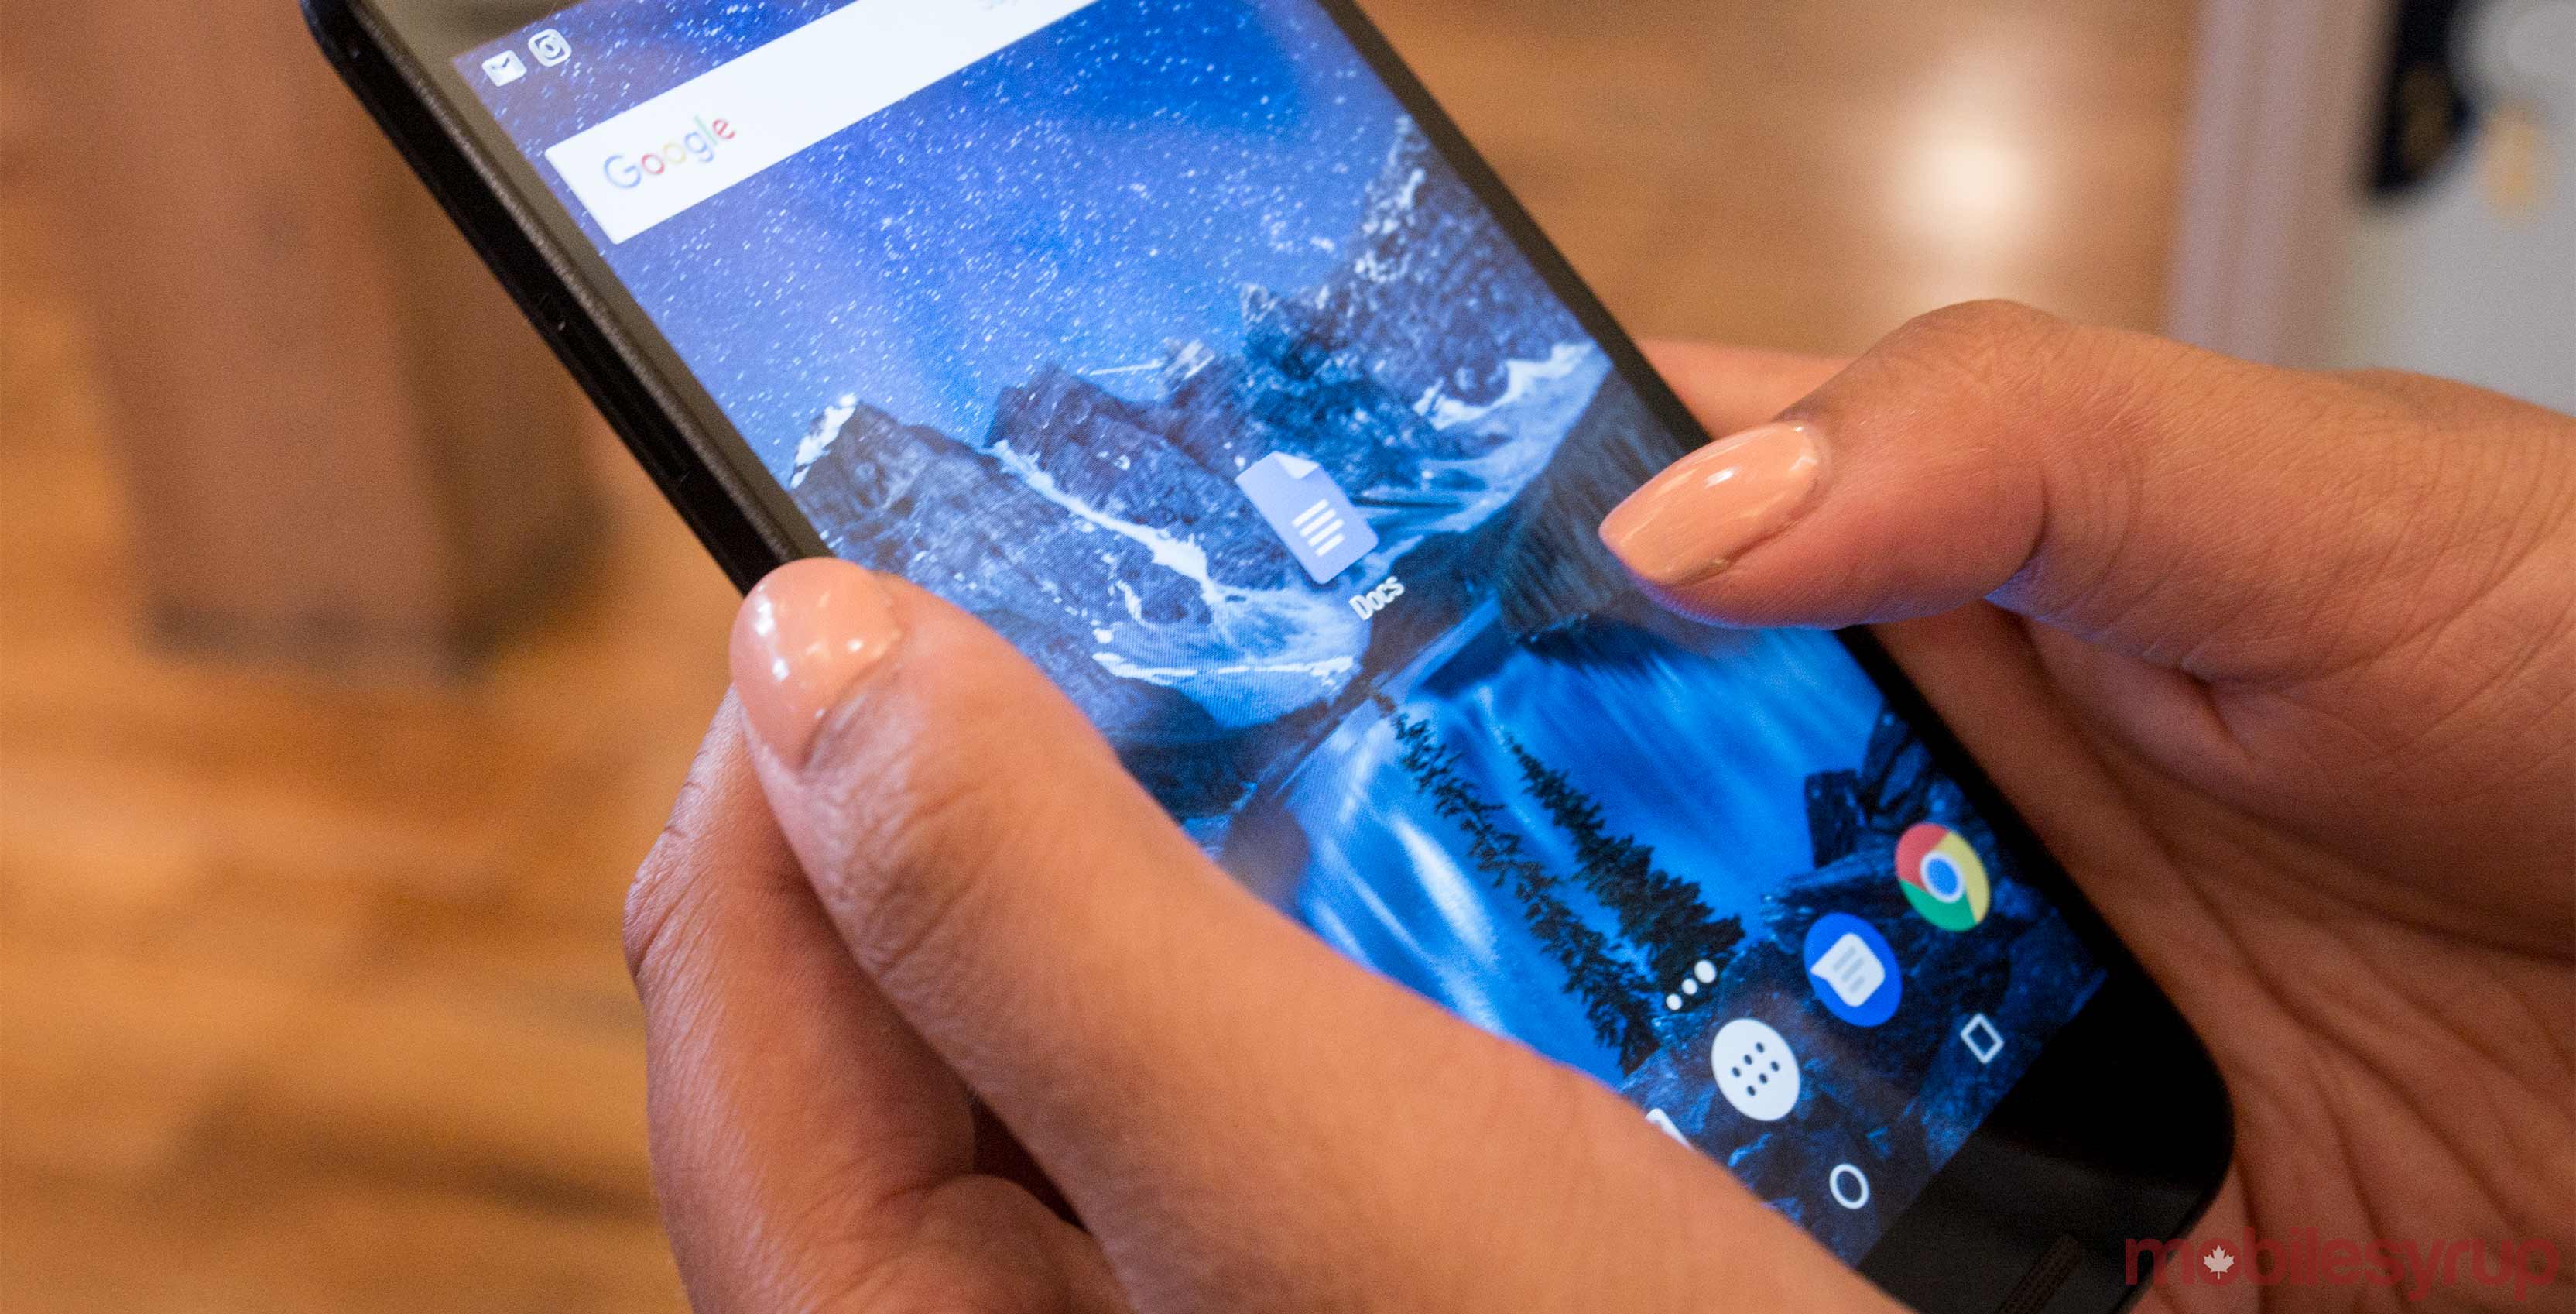 An image showing a hand holding a Nexus 5X with the Google Docs app on-screen